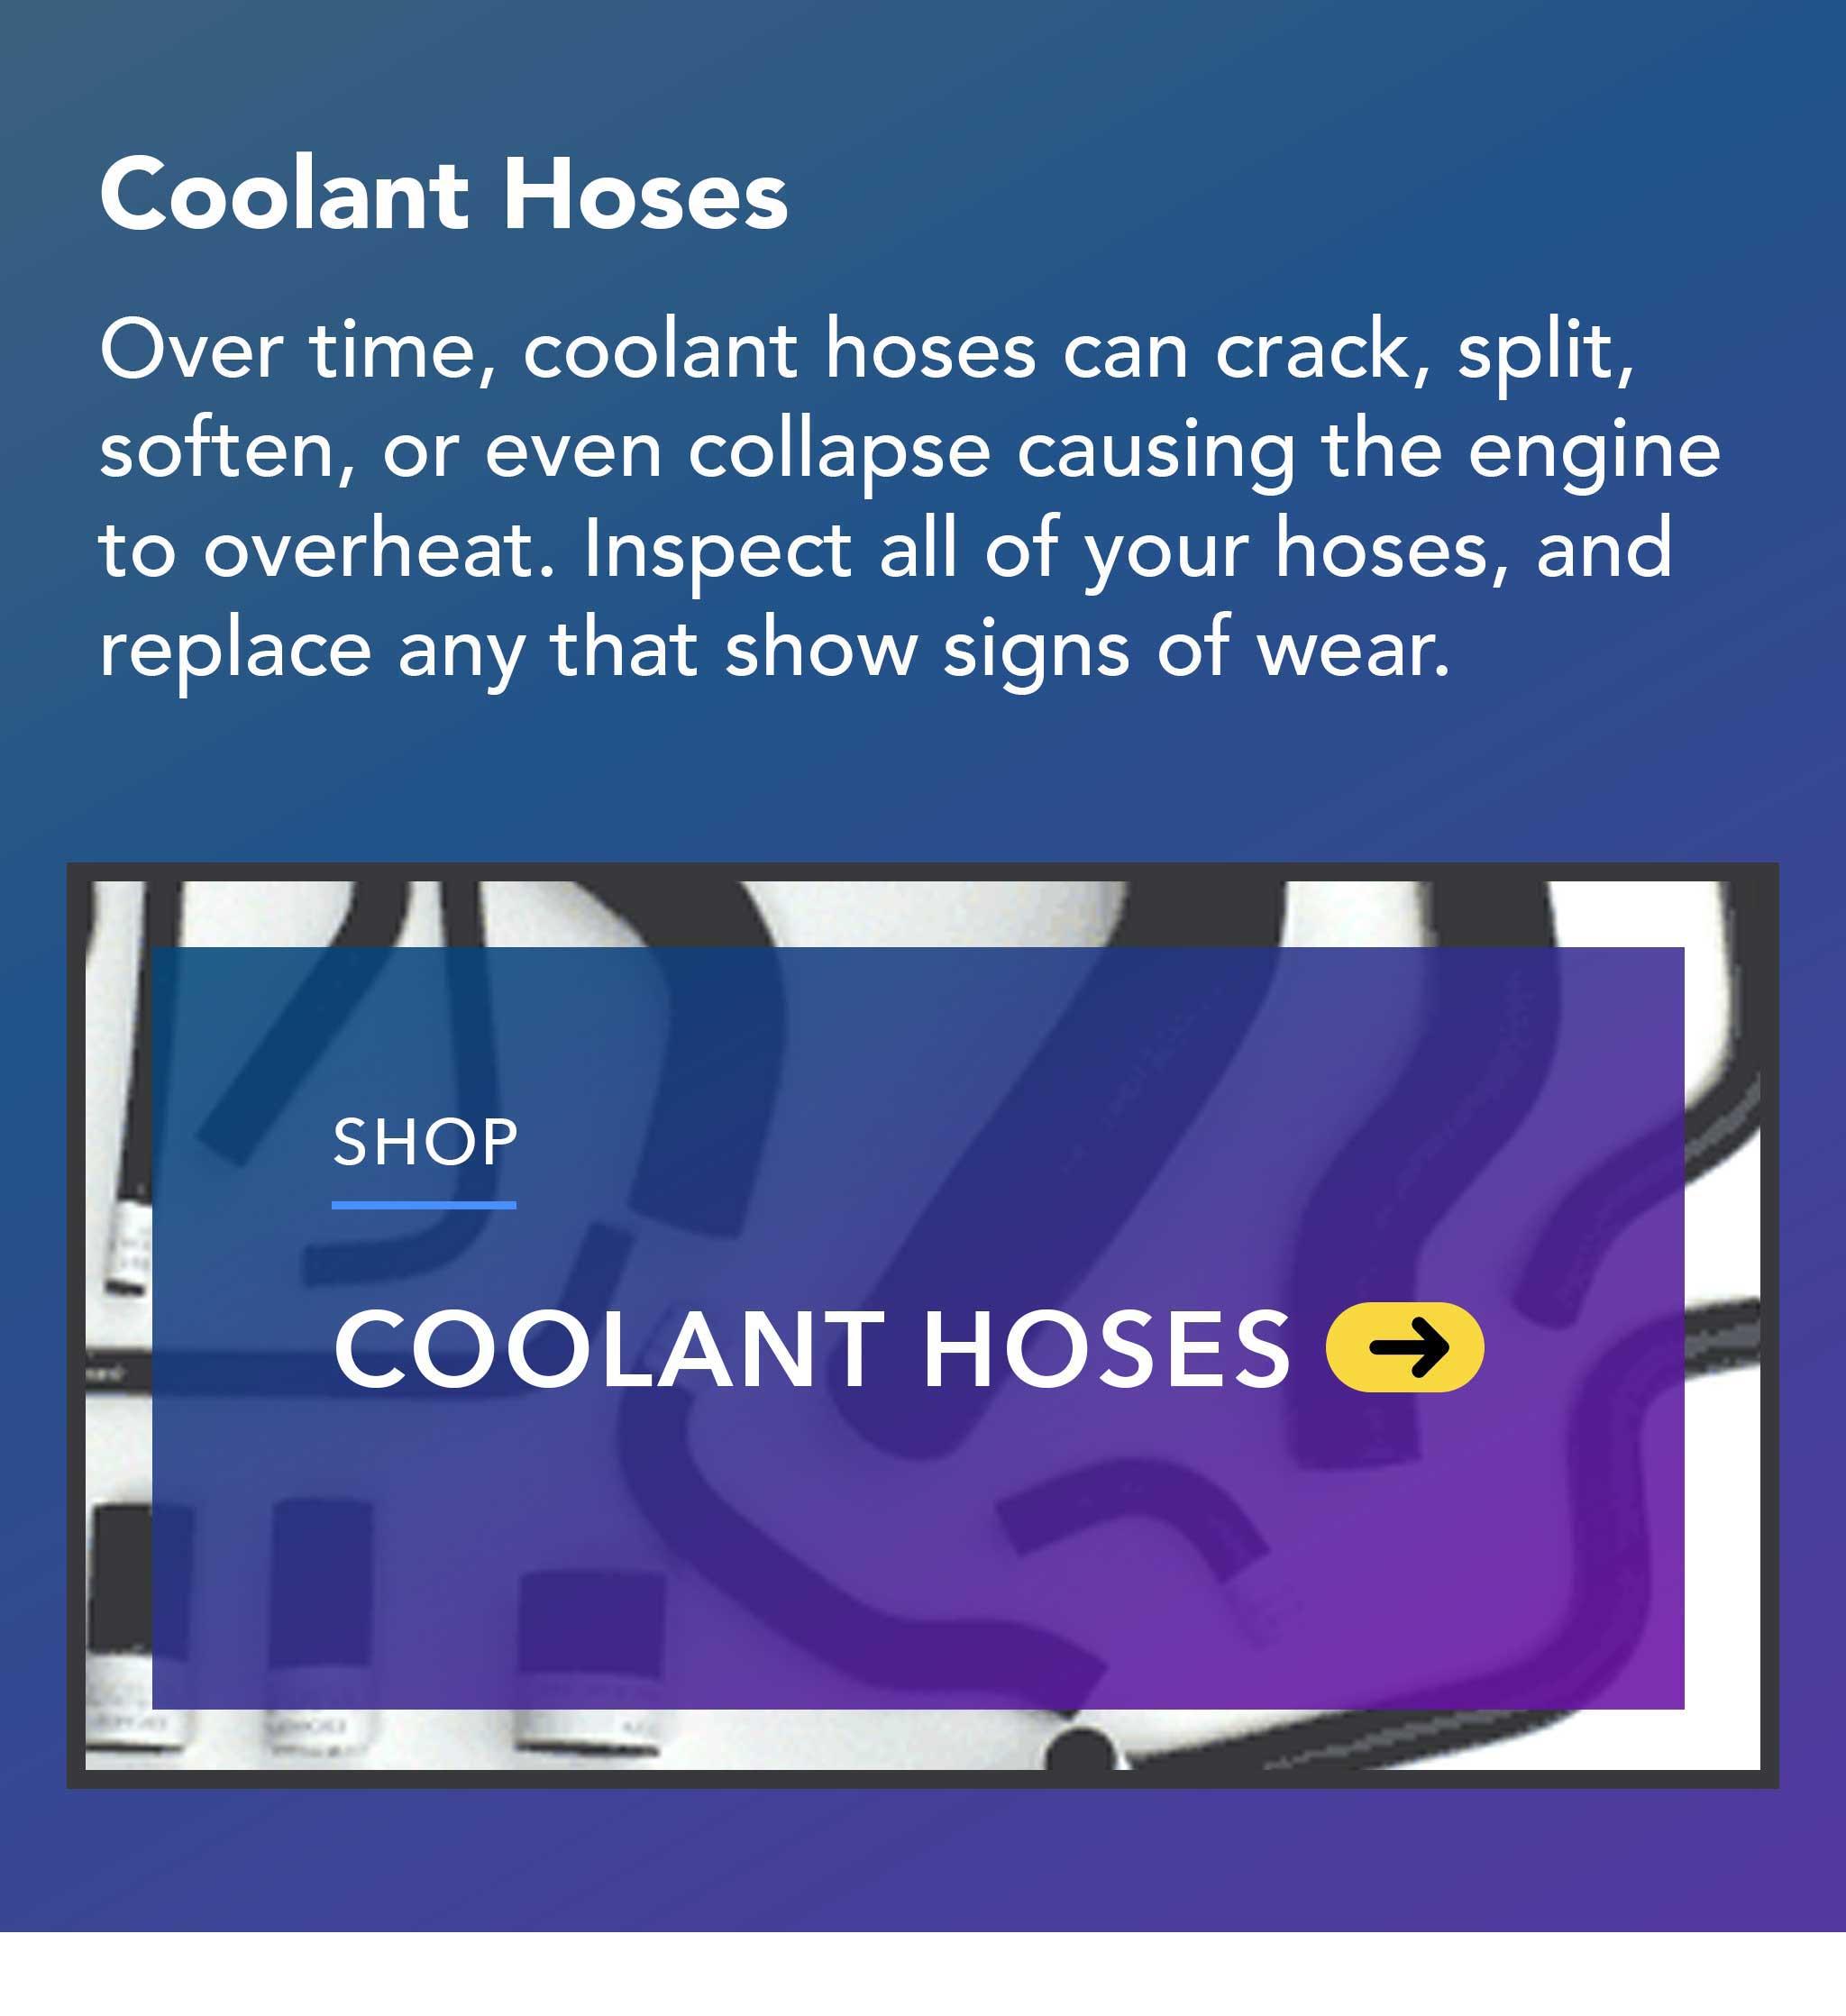 Over time, coolant hoses can crack, split, soften, or even collapse causing the engine to overheat. Inspect all of your hoses, and replace any that show signs of wear.